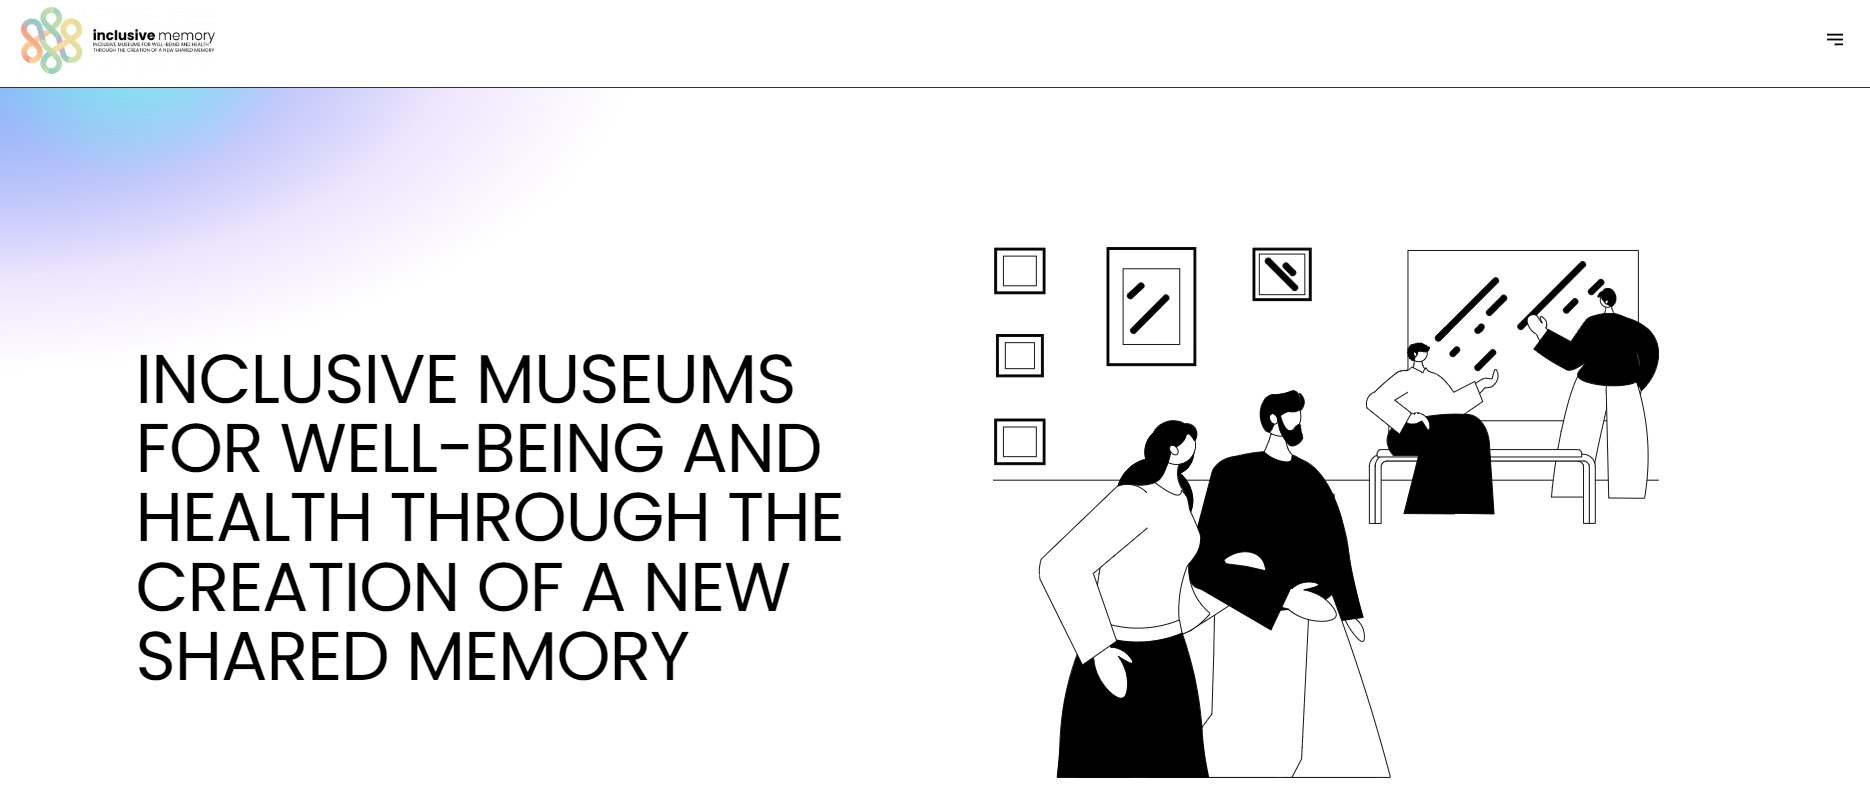 inclusive-museums-for-well-being-and-health-through-the-creation-of-a-new-shared-memory